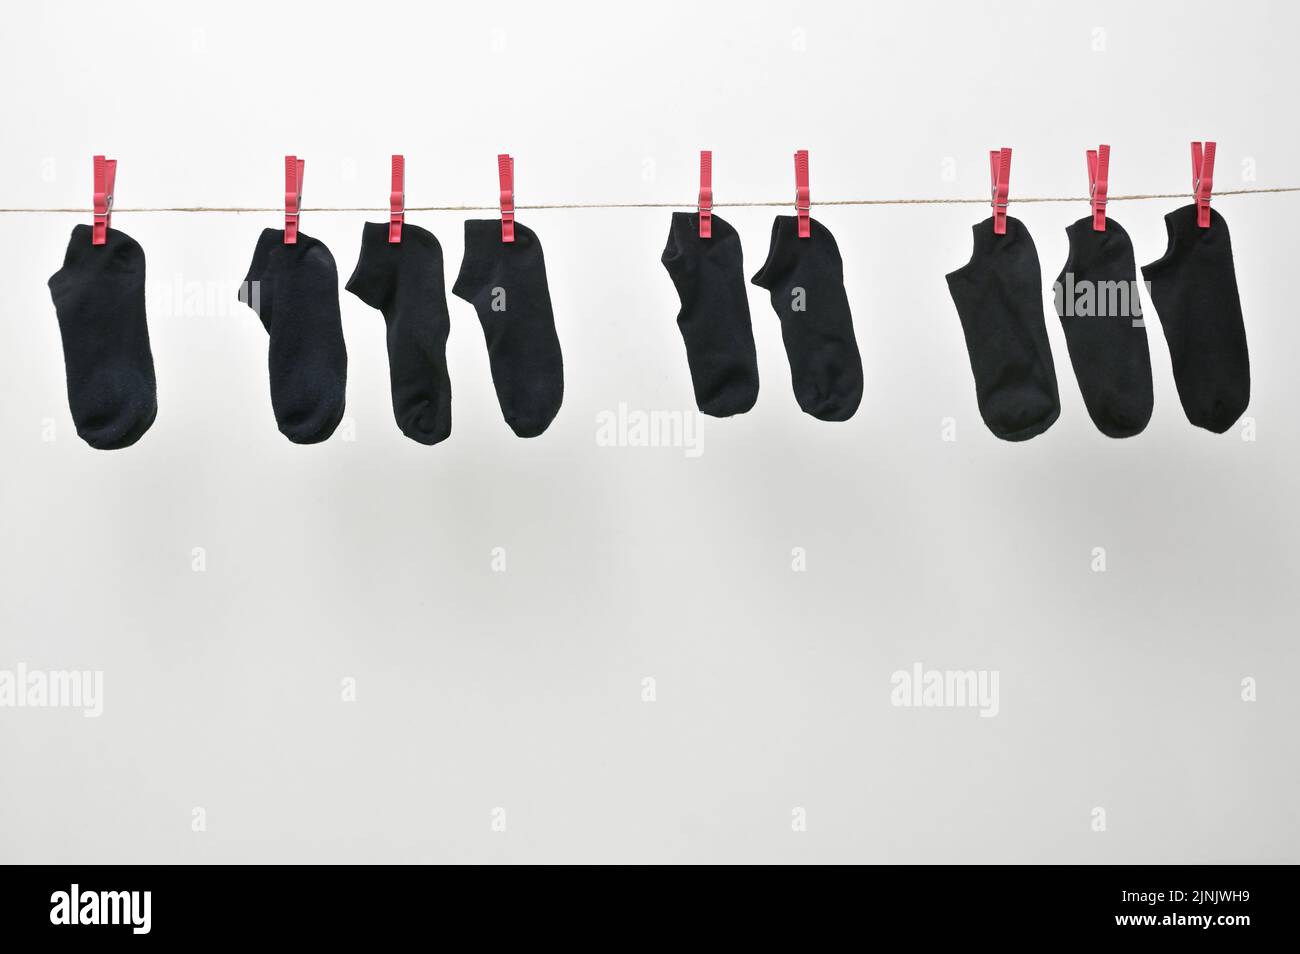 Piano Keyboard From Hanged Black Sock On The Clothesline With Clothespins Stock Photo